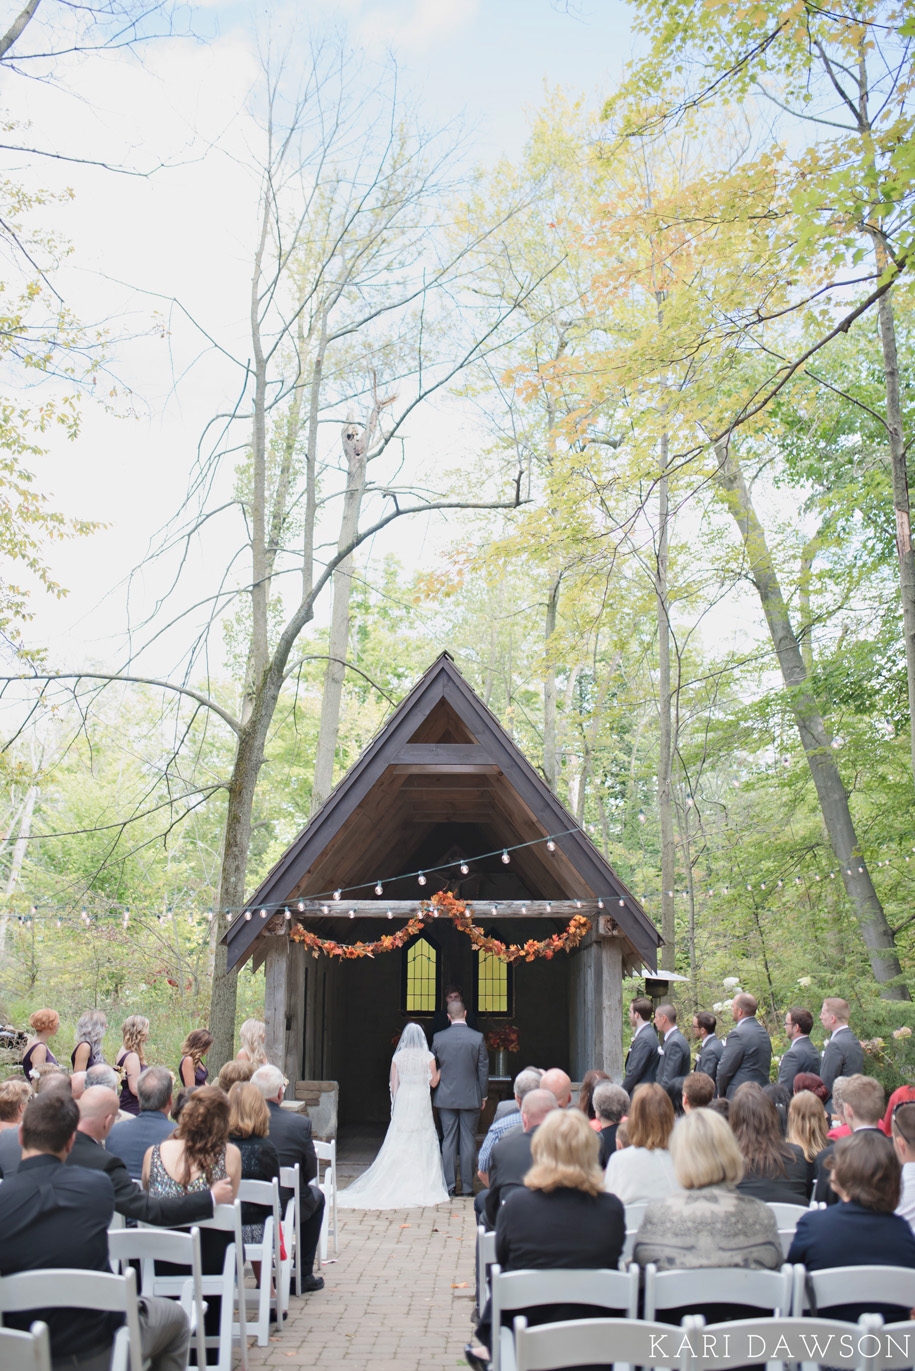 String Lights and Leaf Garland for an Outdoor Ceremony l Rustic and Romantic Outdoor Inner Circle Estate Wedding in the woods by Kari Dawson